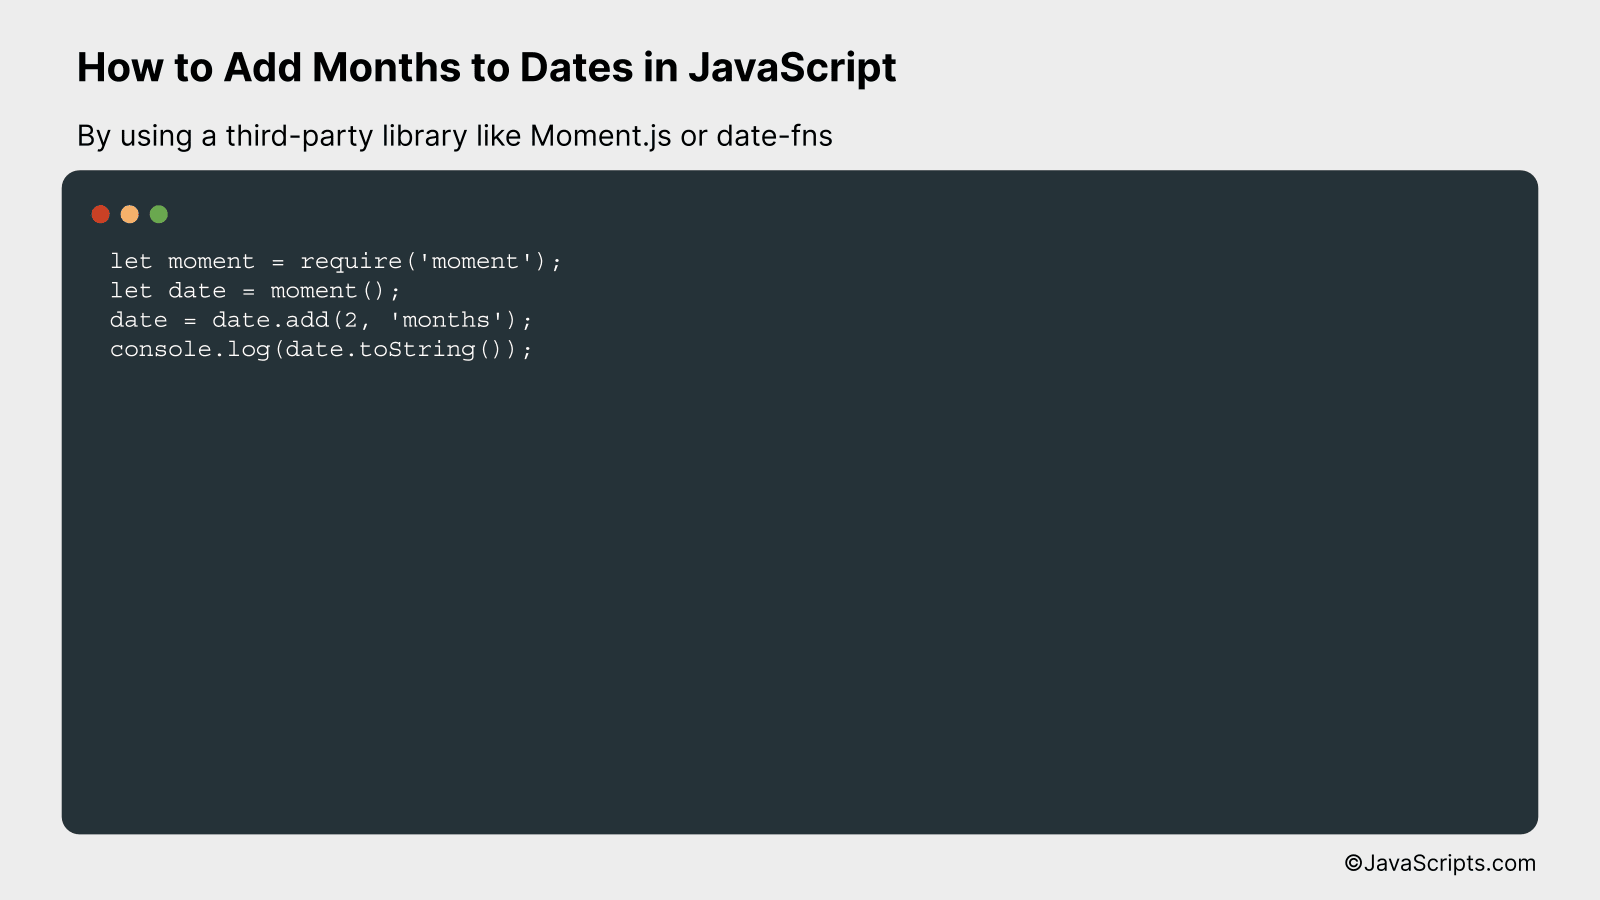 By using a third-party library like Moment.js or date-fns